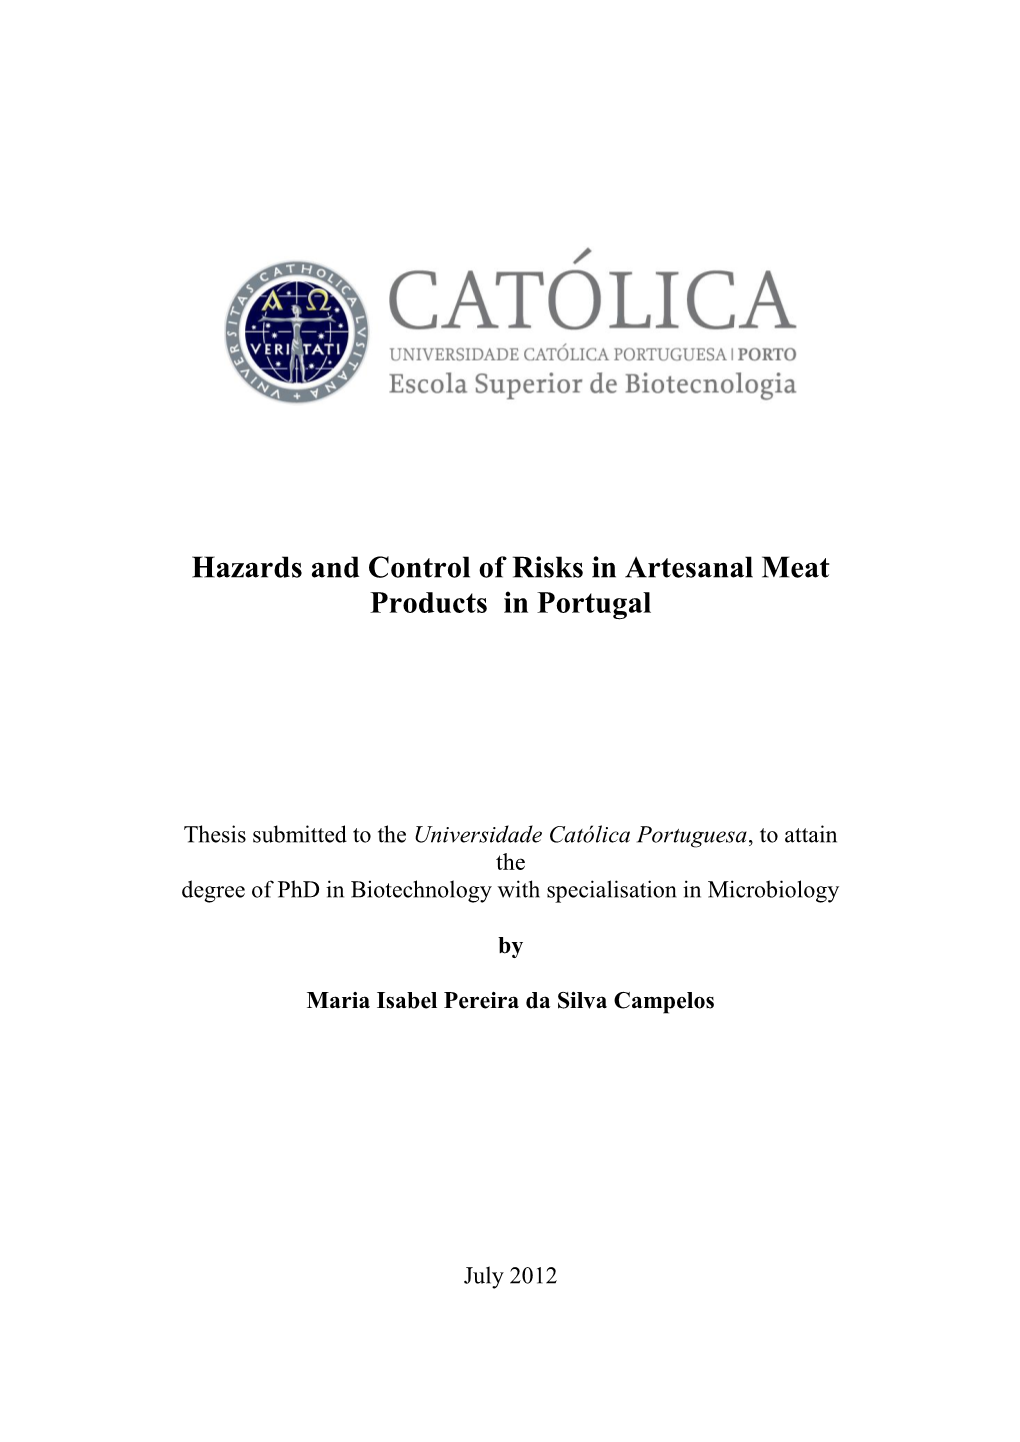 Hazards and Control of Risks in Artesanal Meat Products in Portugal